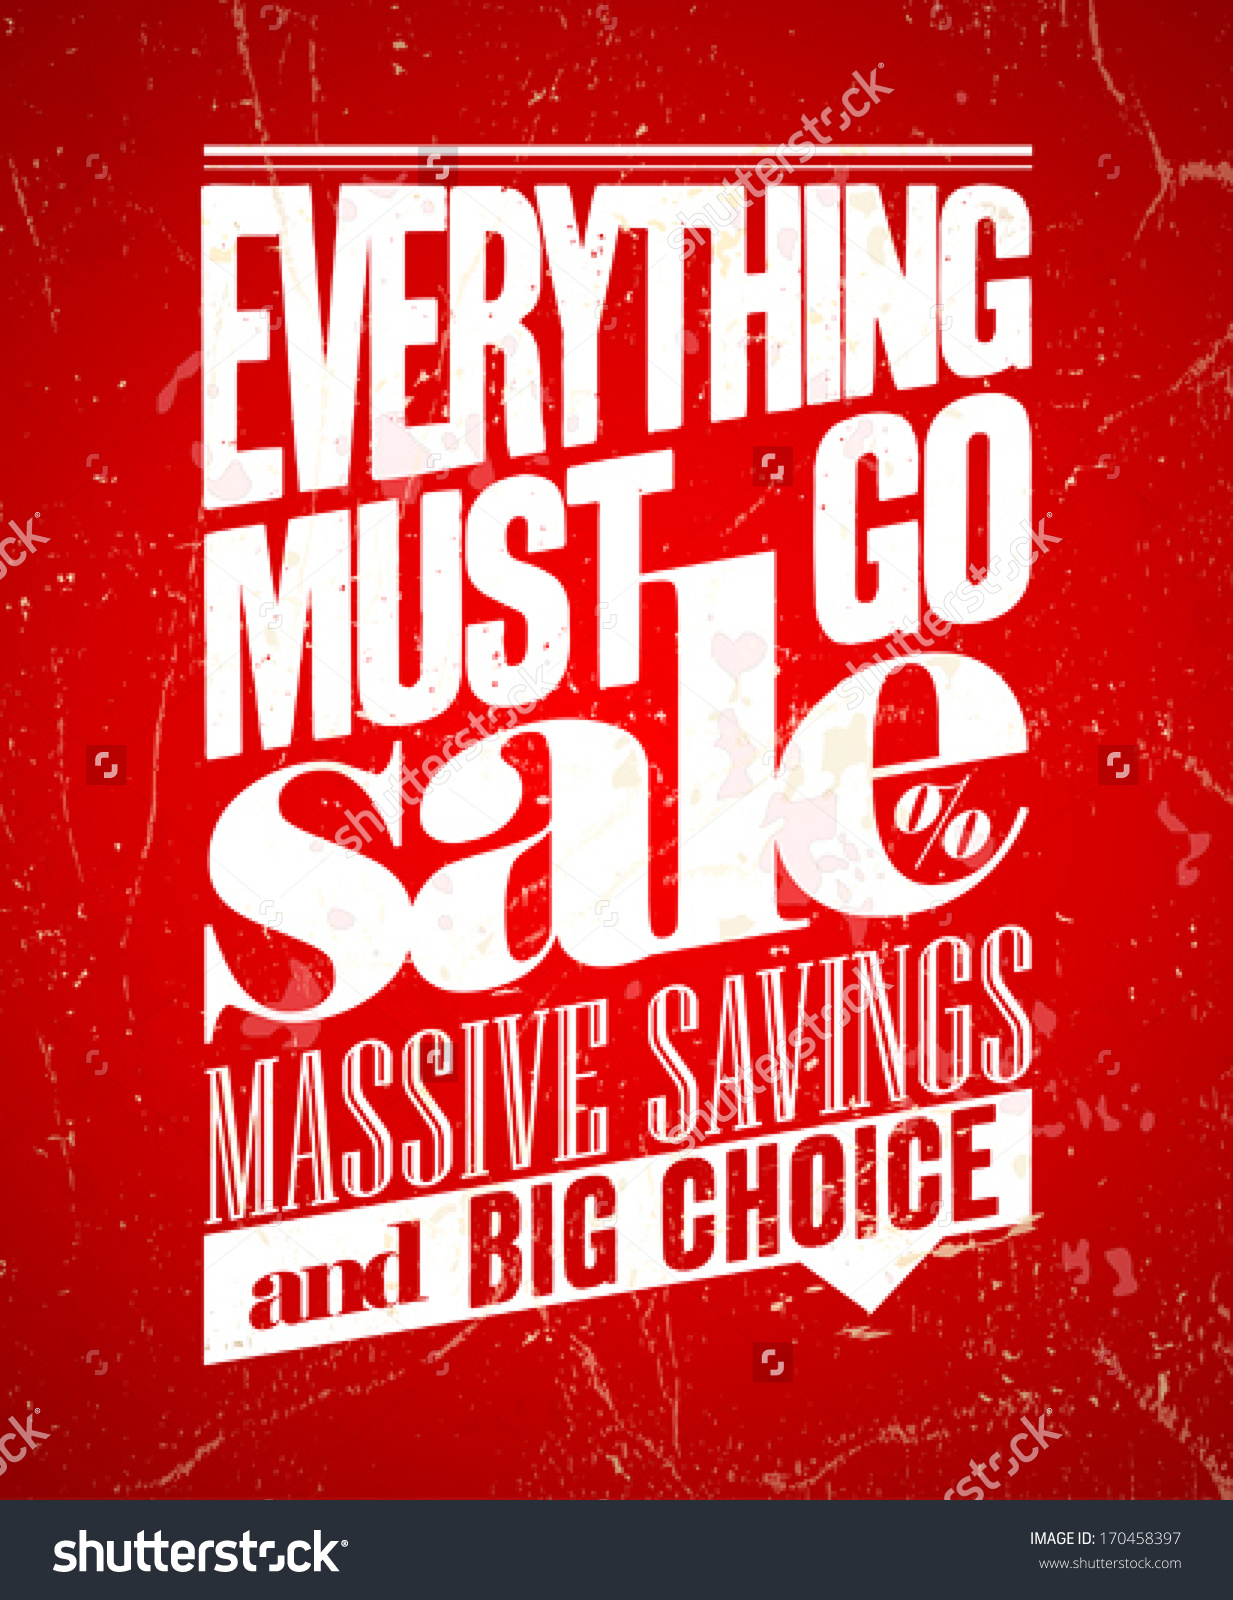 Everything Must Go #6